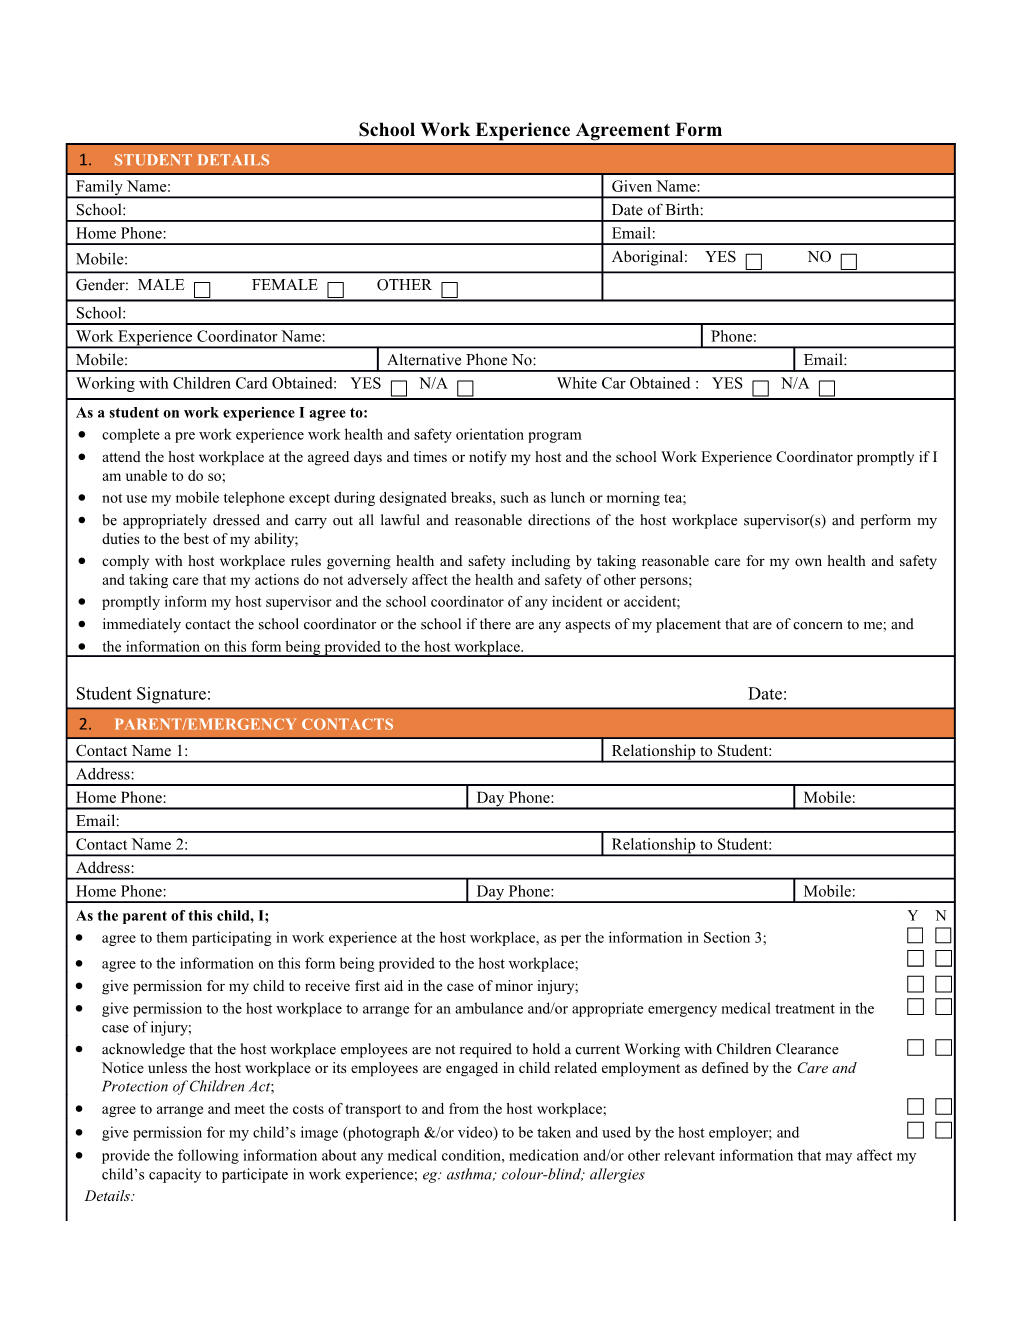 School Work Experience Agreement Form